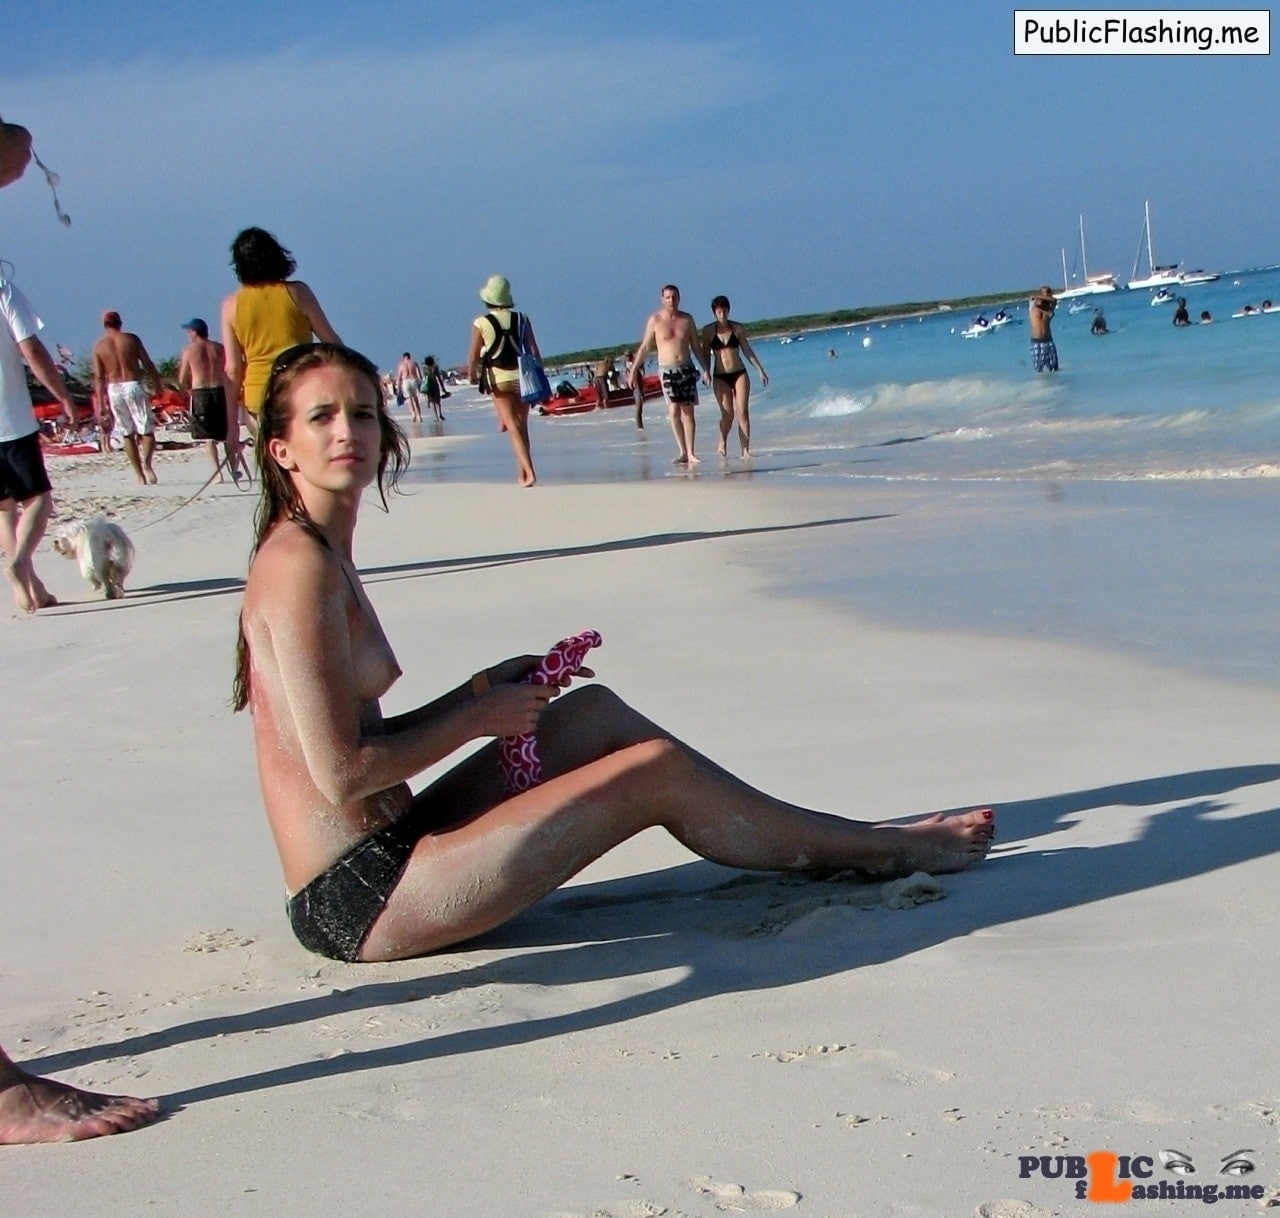 beach teenager topless - Teen brunette is sitting in the sand topless Cute teenage brunette is on the beach, sunbathing topless on the afternoon Sun and enjoy in a freshness of the ocean. She is sitting in the sand without bikini top of some... - Amateur